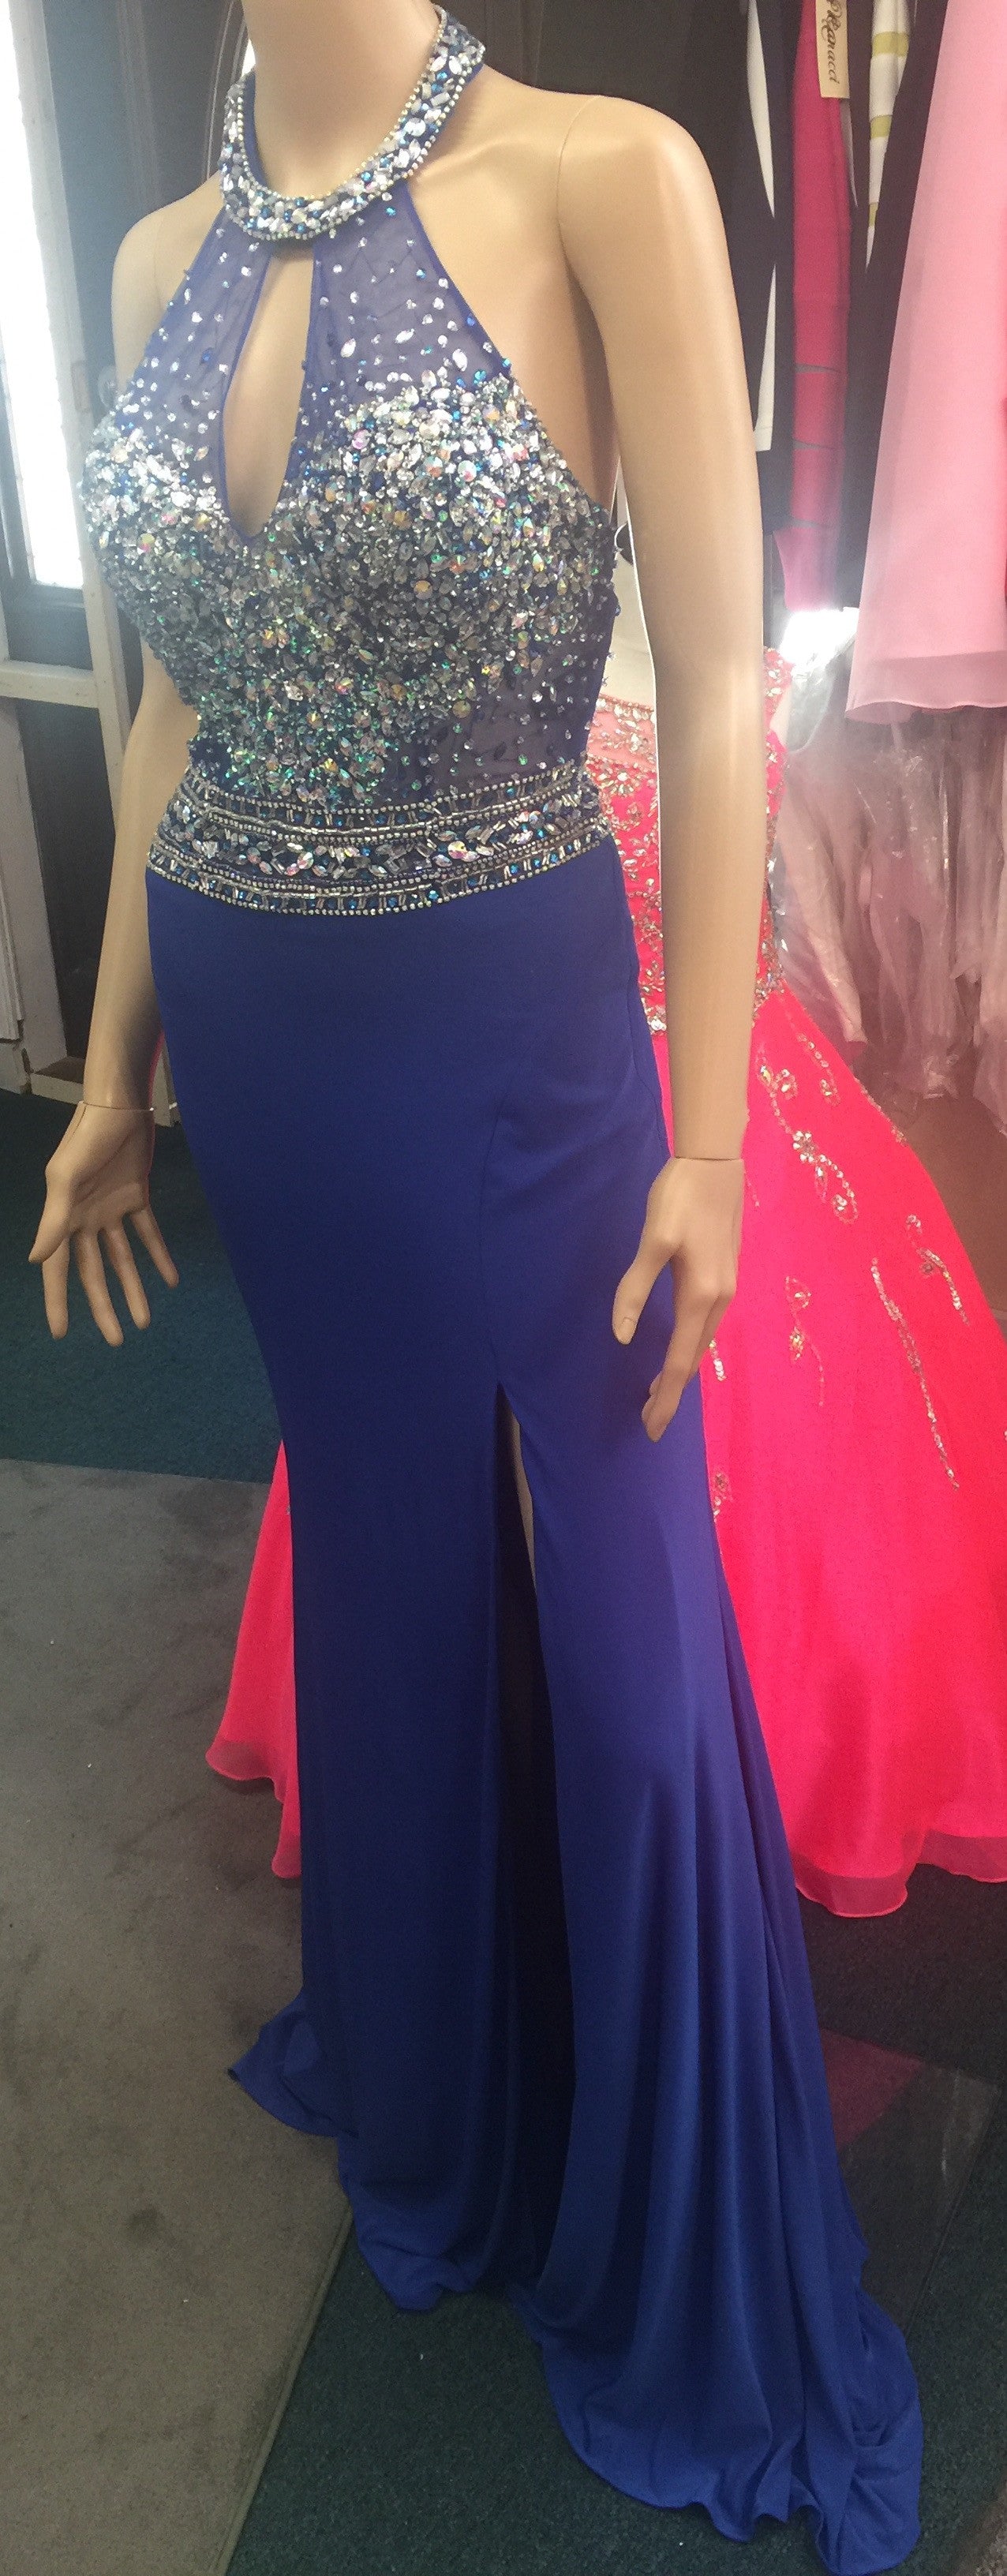 JVN by Jovani 23576 Royal Blue size 4 prom dress pageant gown long sheer